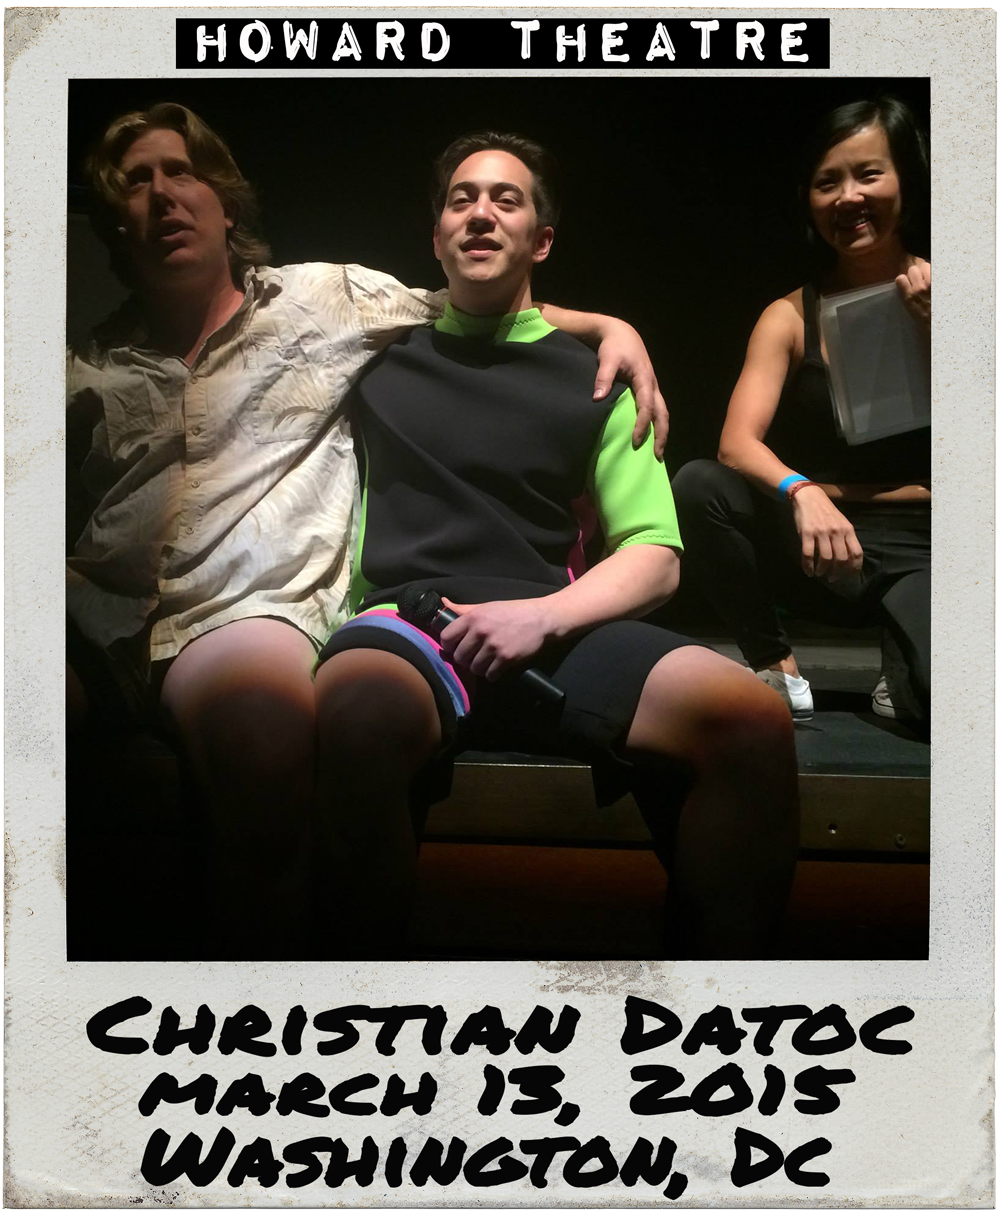 03_13_15_Christian-Datoc_Howard-Theatre_DC.png